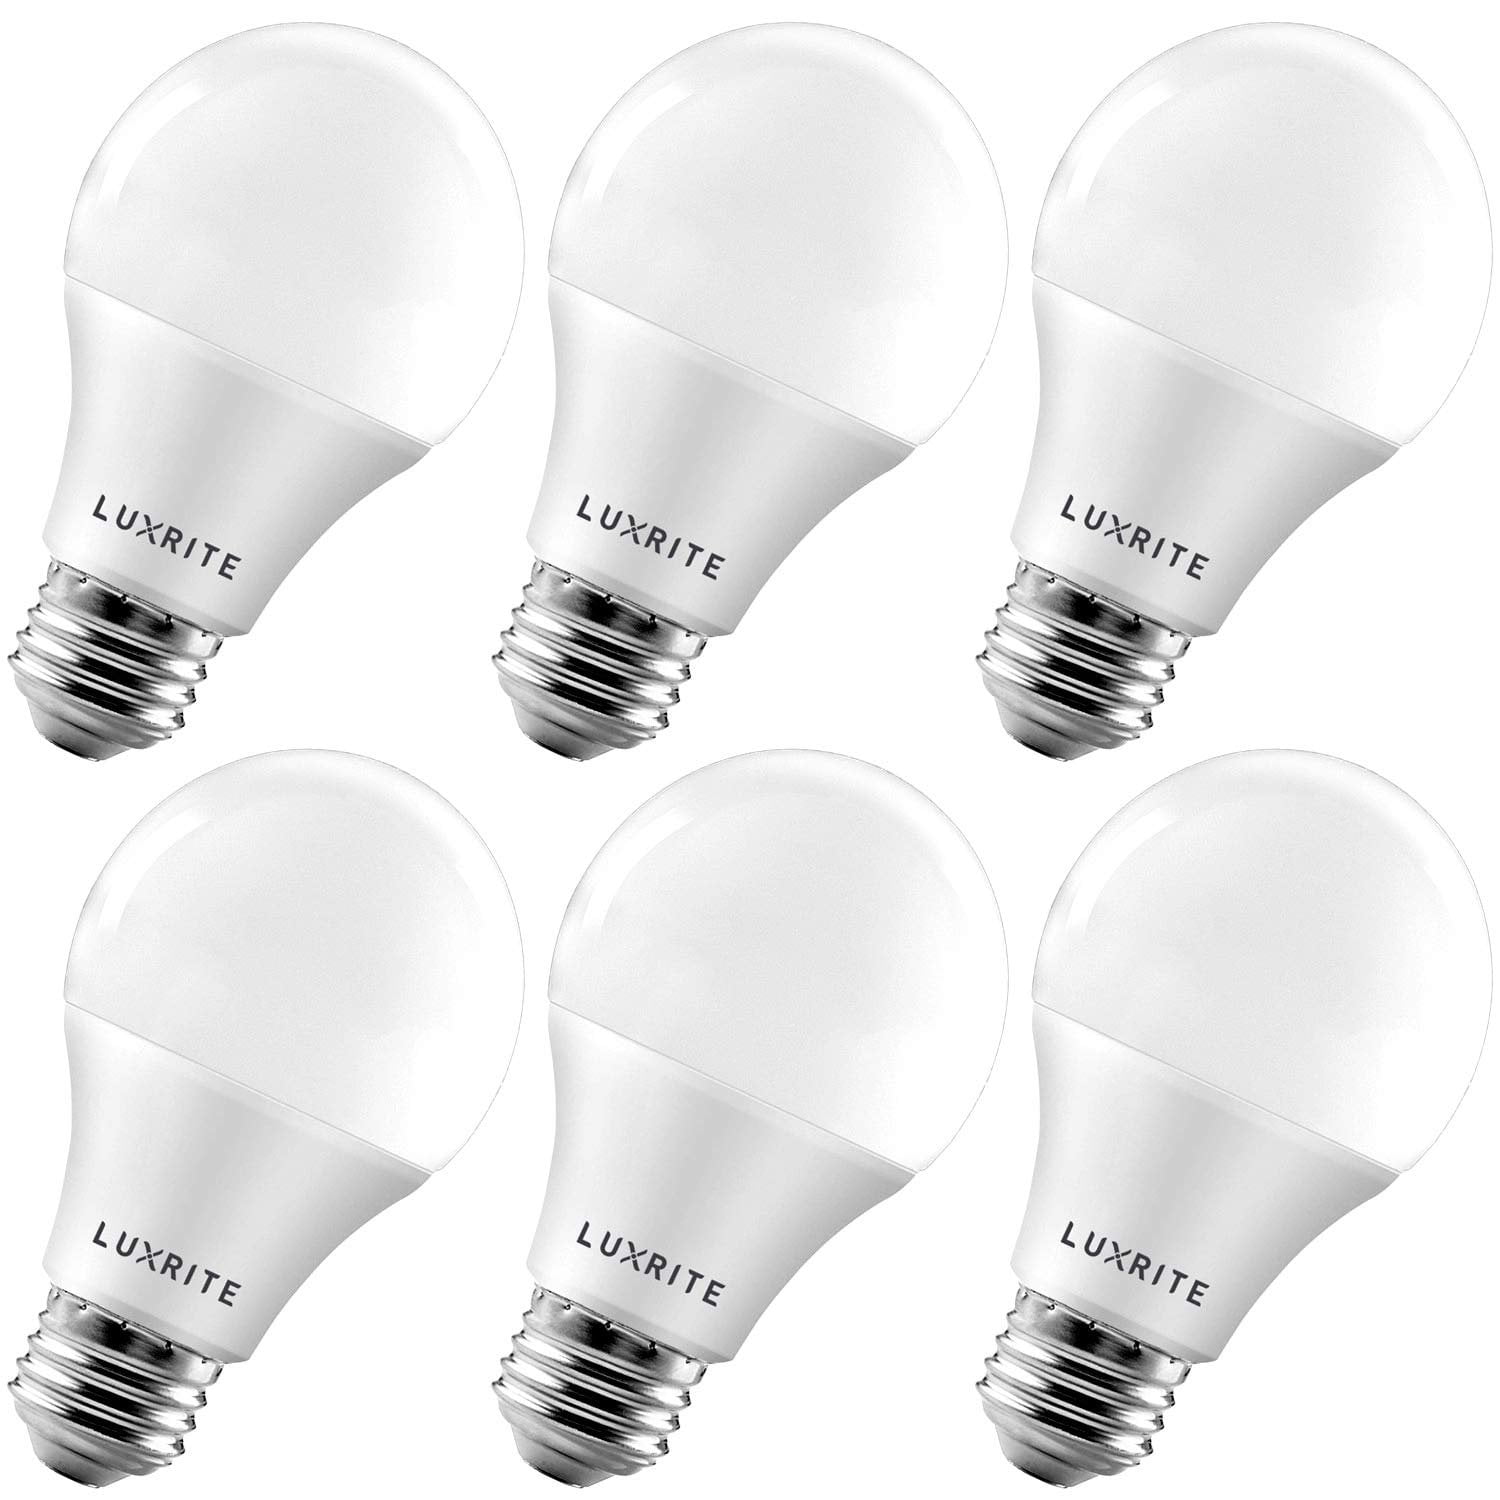 Luxrite A19 LED Dimmable Light 9W (60W Equivalent) 5000K Bright White, 800 Lumens, E26, 6 Pack - Walmart.com